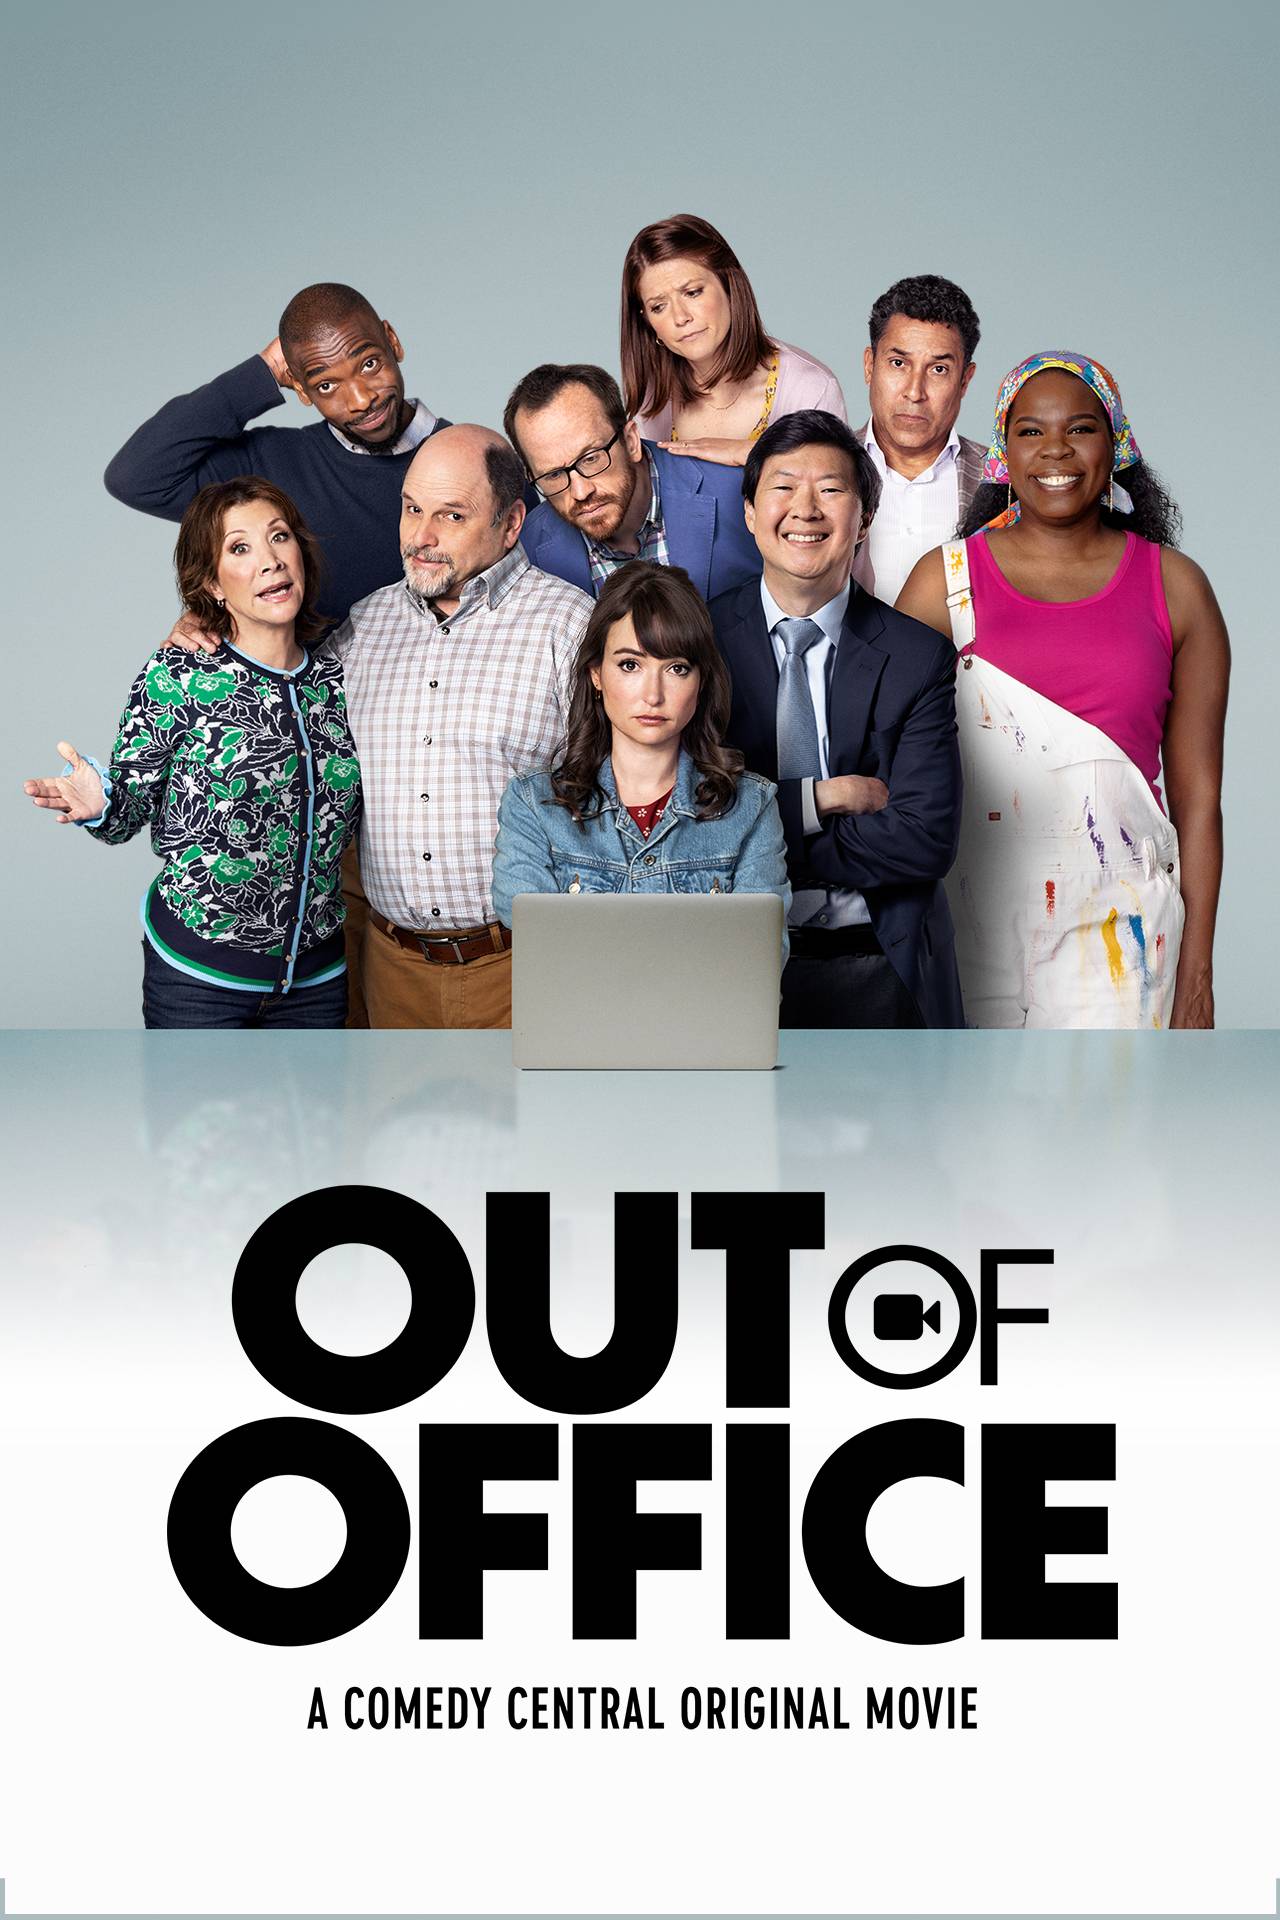 Total 80+ imagen comedy central the office